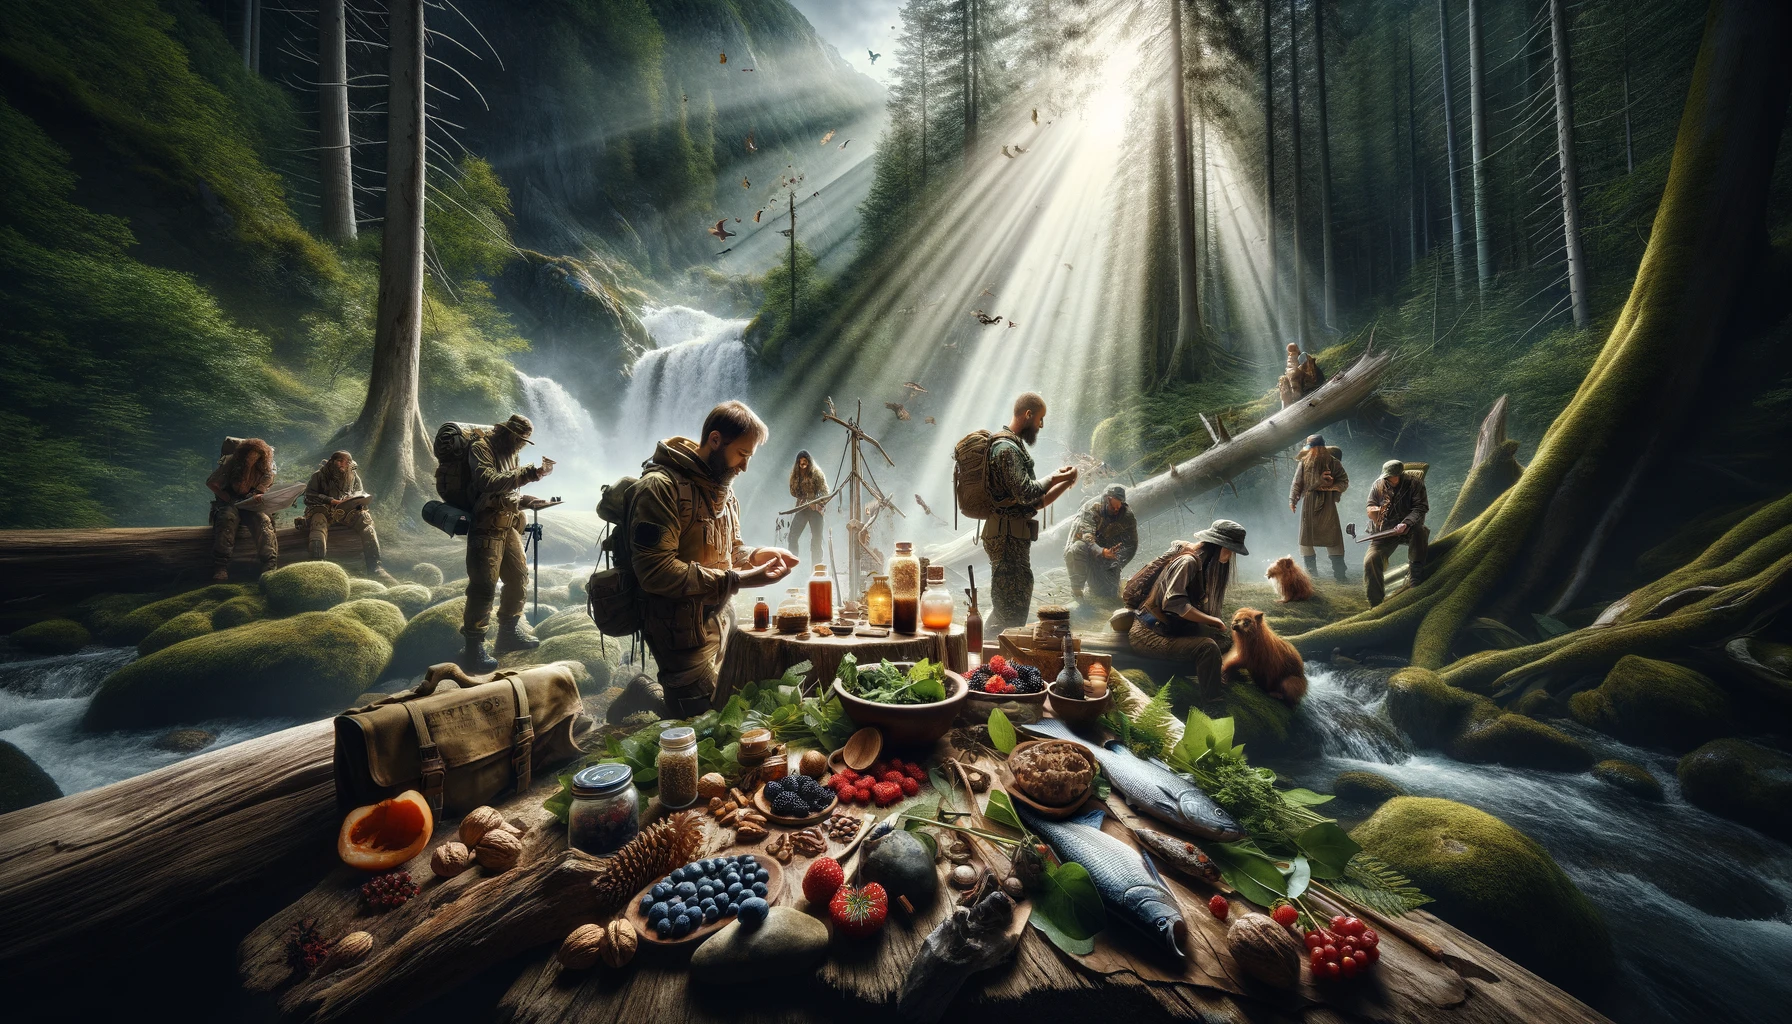 Wilderness survival scene with individuals gathering diverse natural foods to overcome nutrient deficiencies, set in a rich forest environment with dynamic sunlight highlighting resourcefulness and the bounty of nature